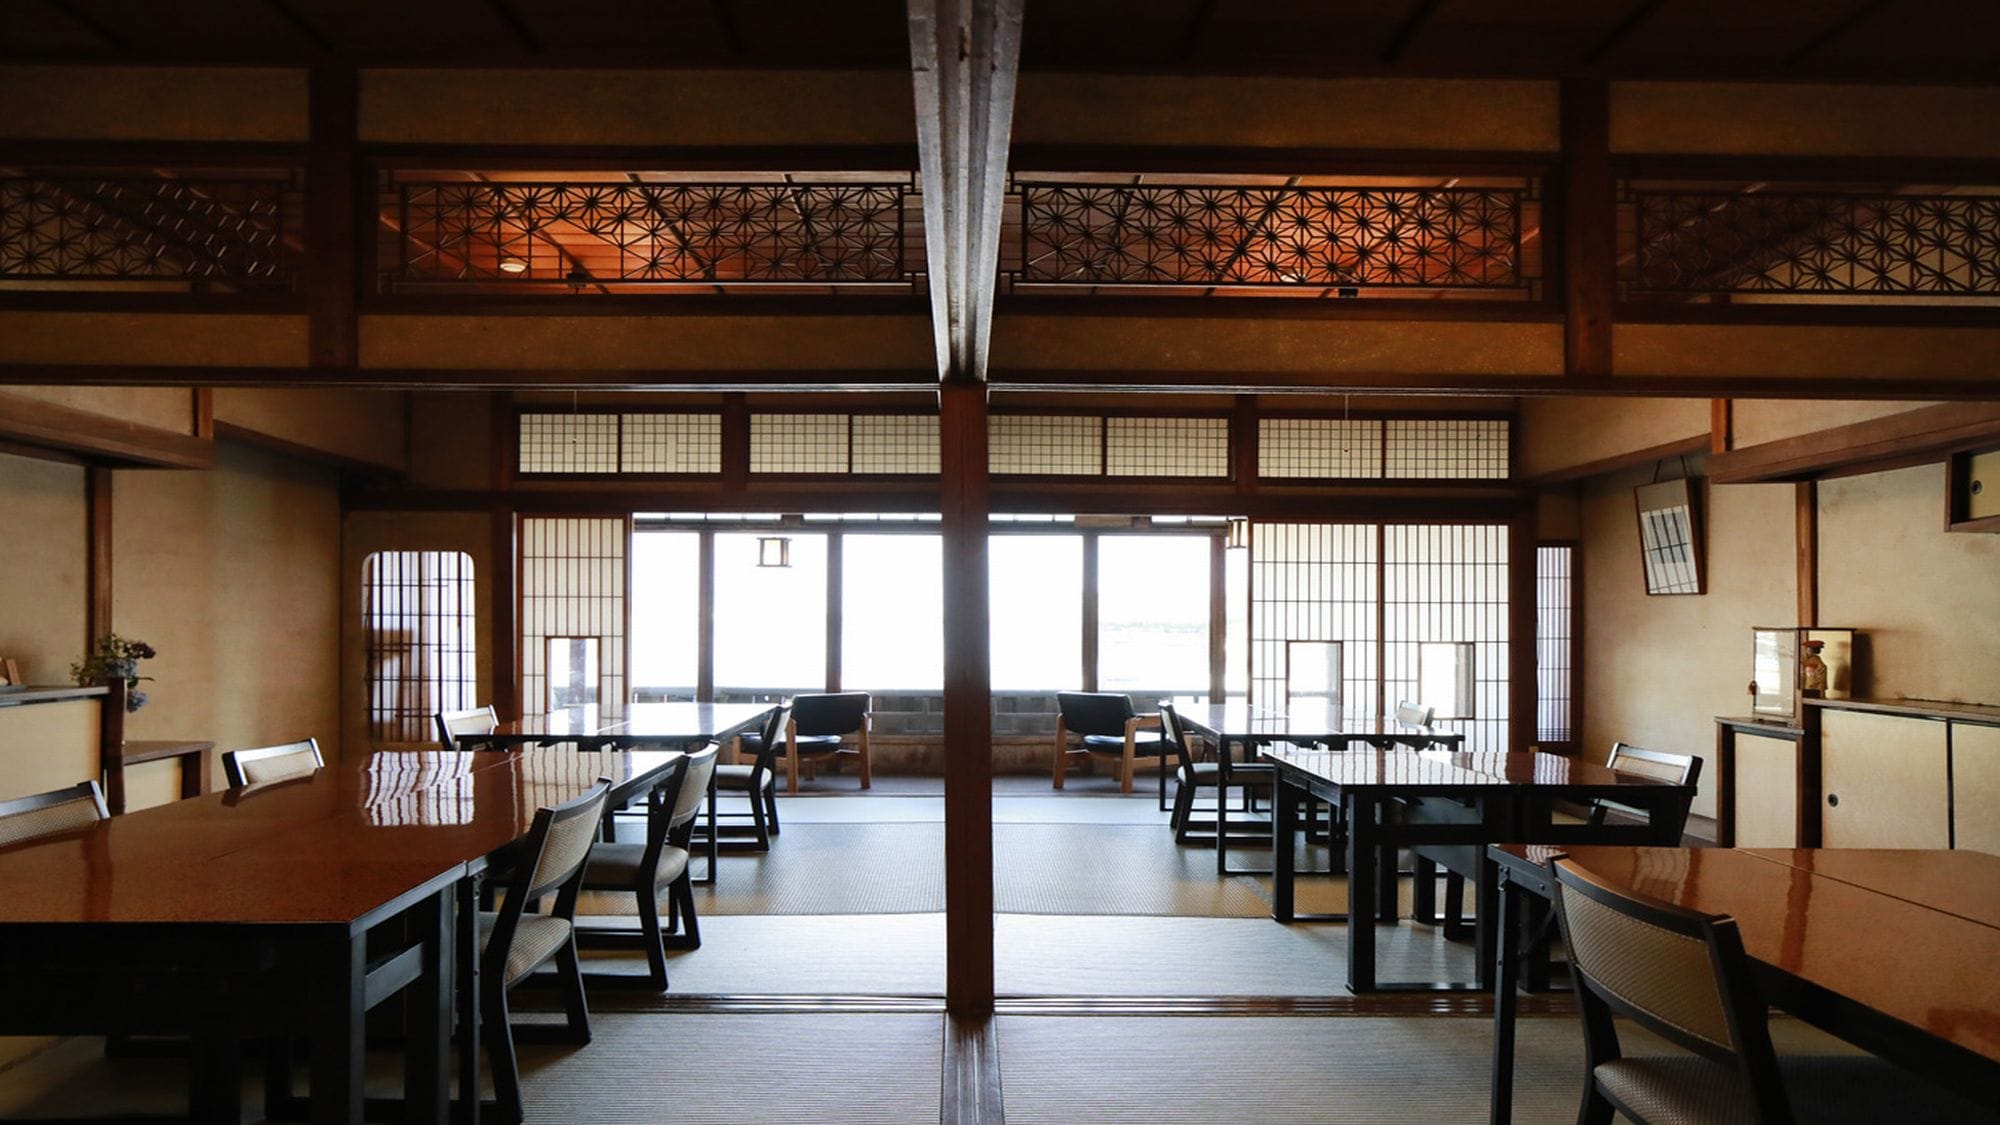 [Mihokan Main Building] Breakfast is a nationally registered tangible cultural property building & hellip;